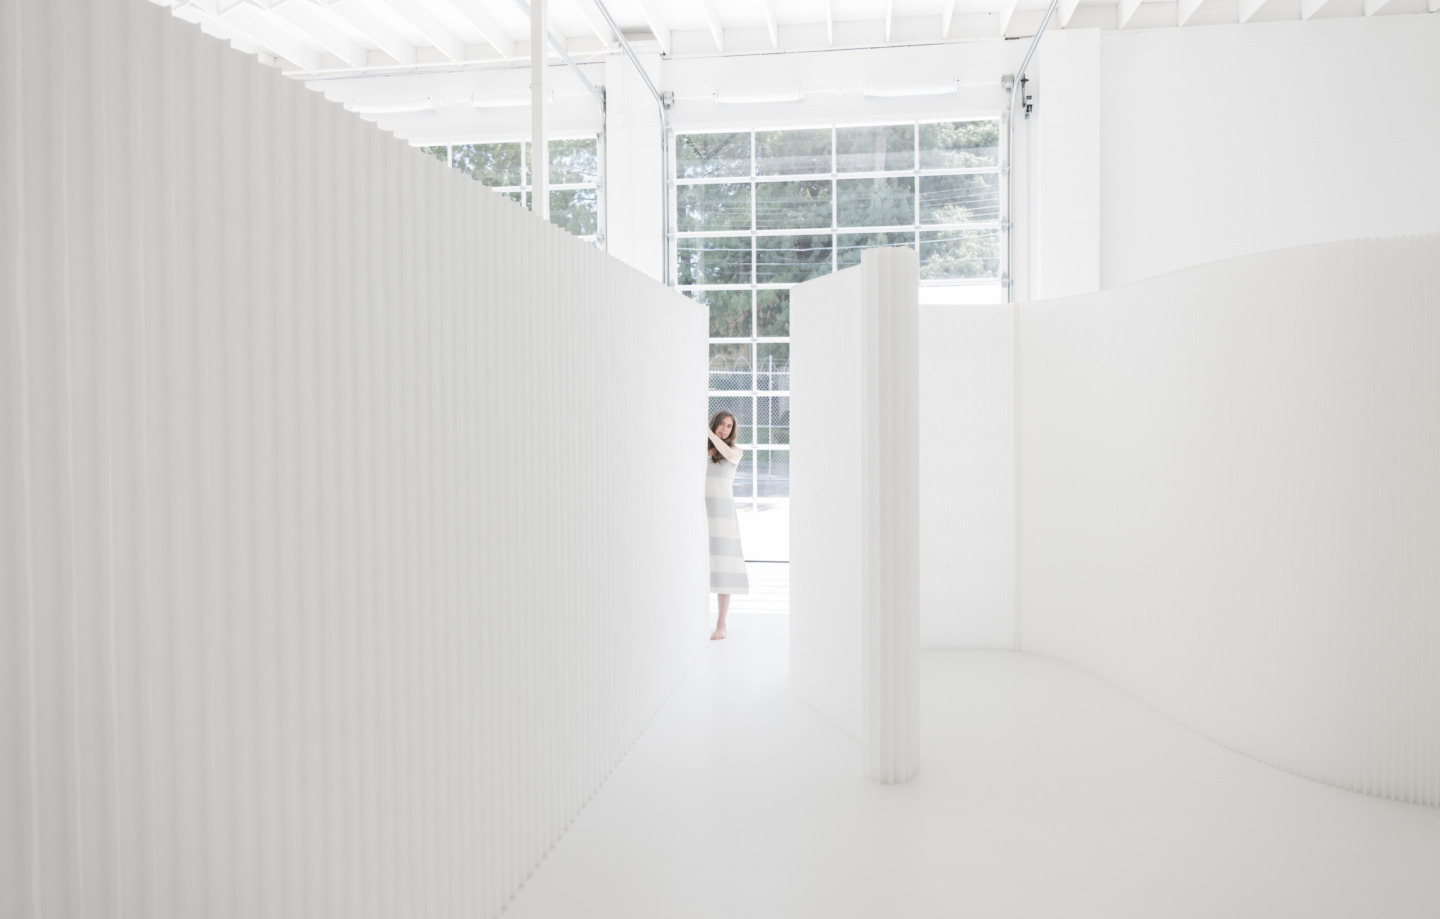 a sculptural installation of white textile softwalls - moveable wall partitions by molo